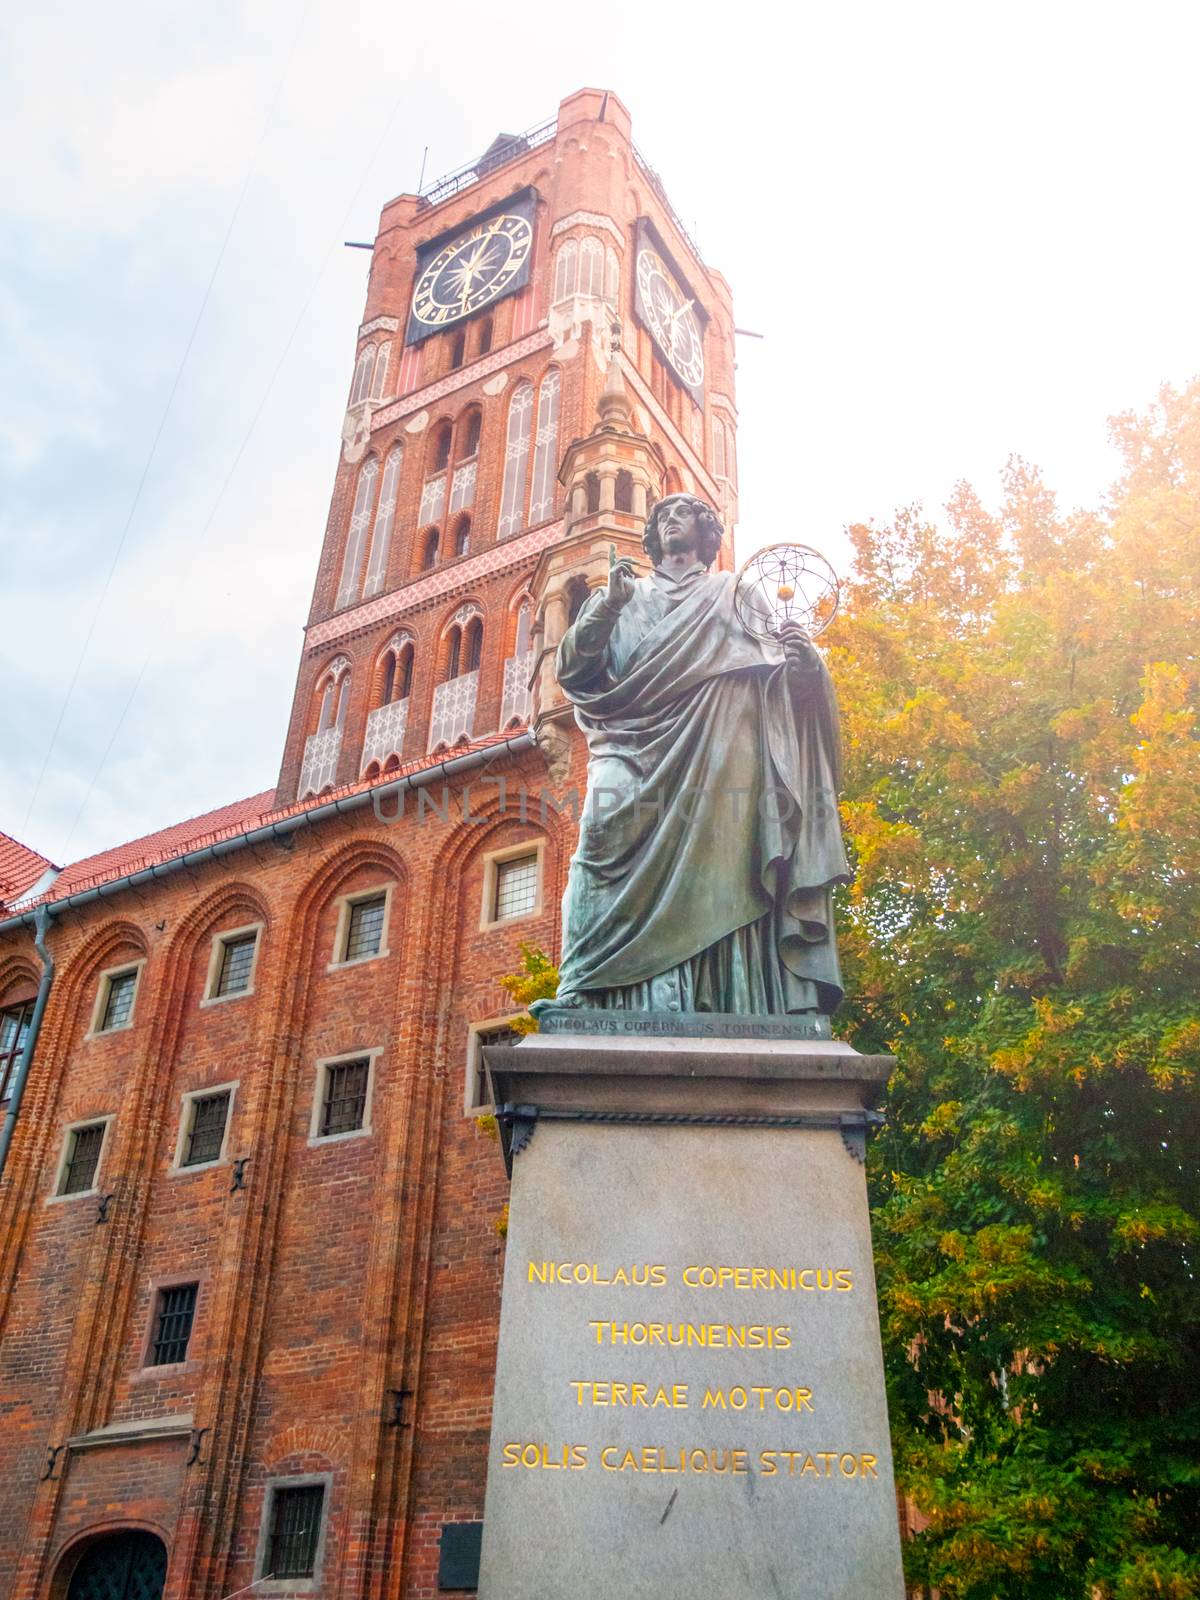 TORUN, POLAND - AUGUST 27, 2014: Statue of Nicolaus Copernicus, Renaissance mathematician and astronomer, in Torun, Poland by pyty